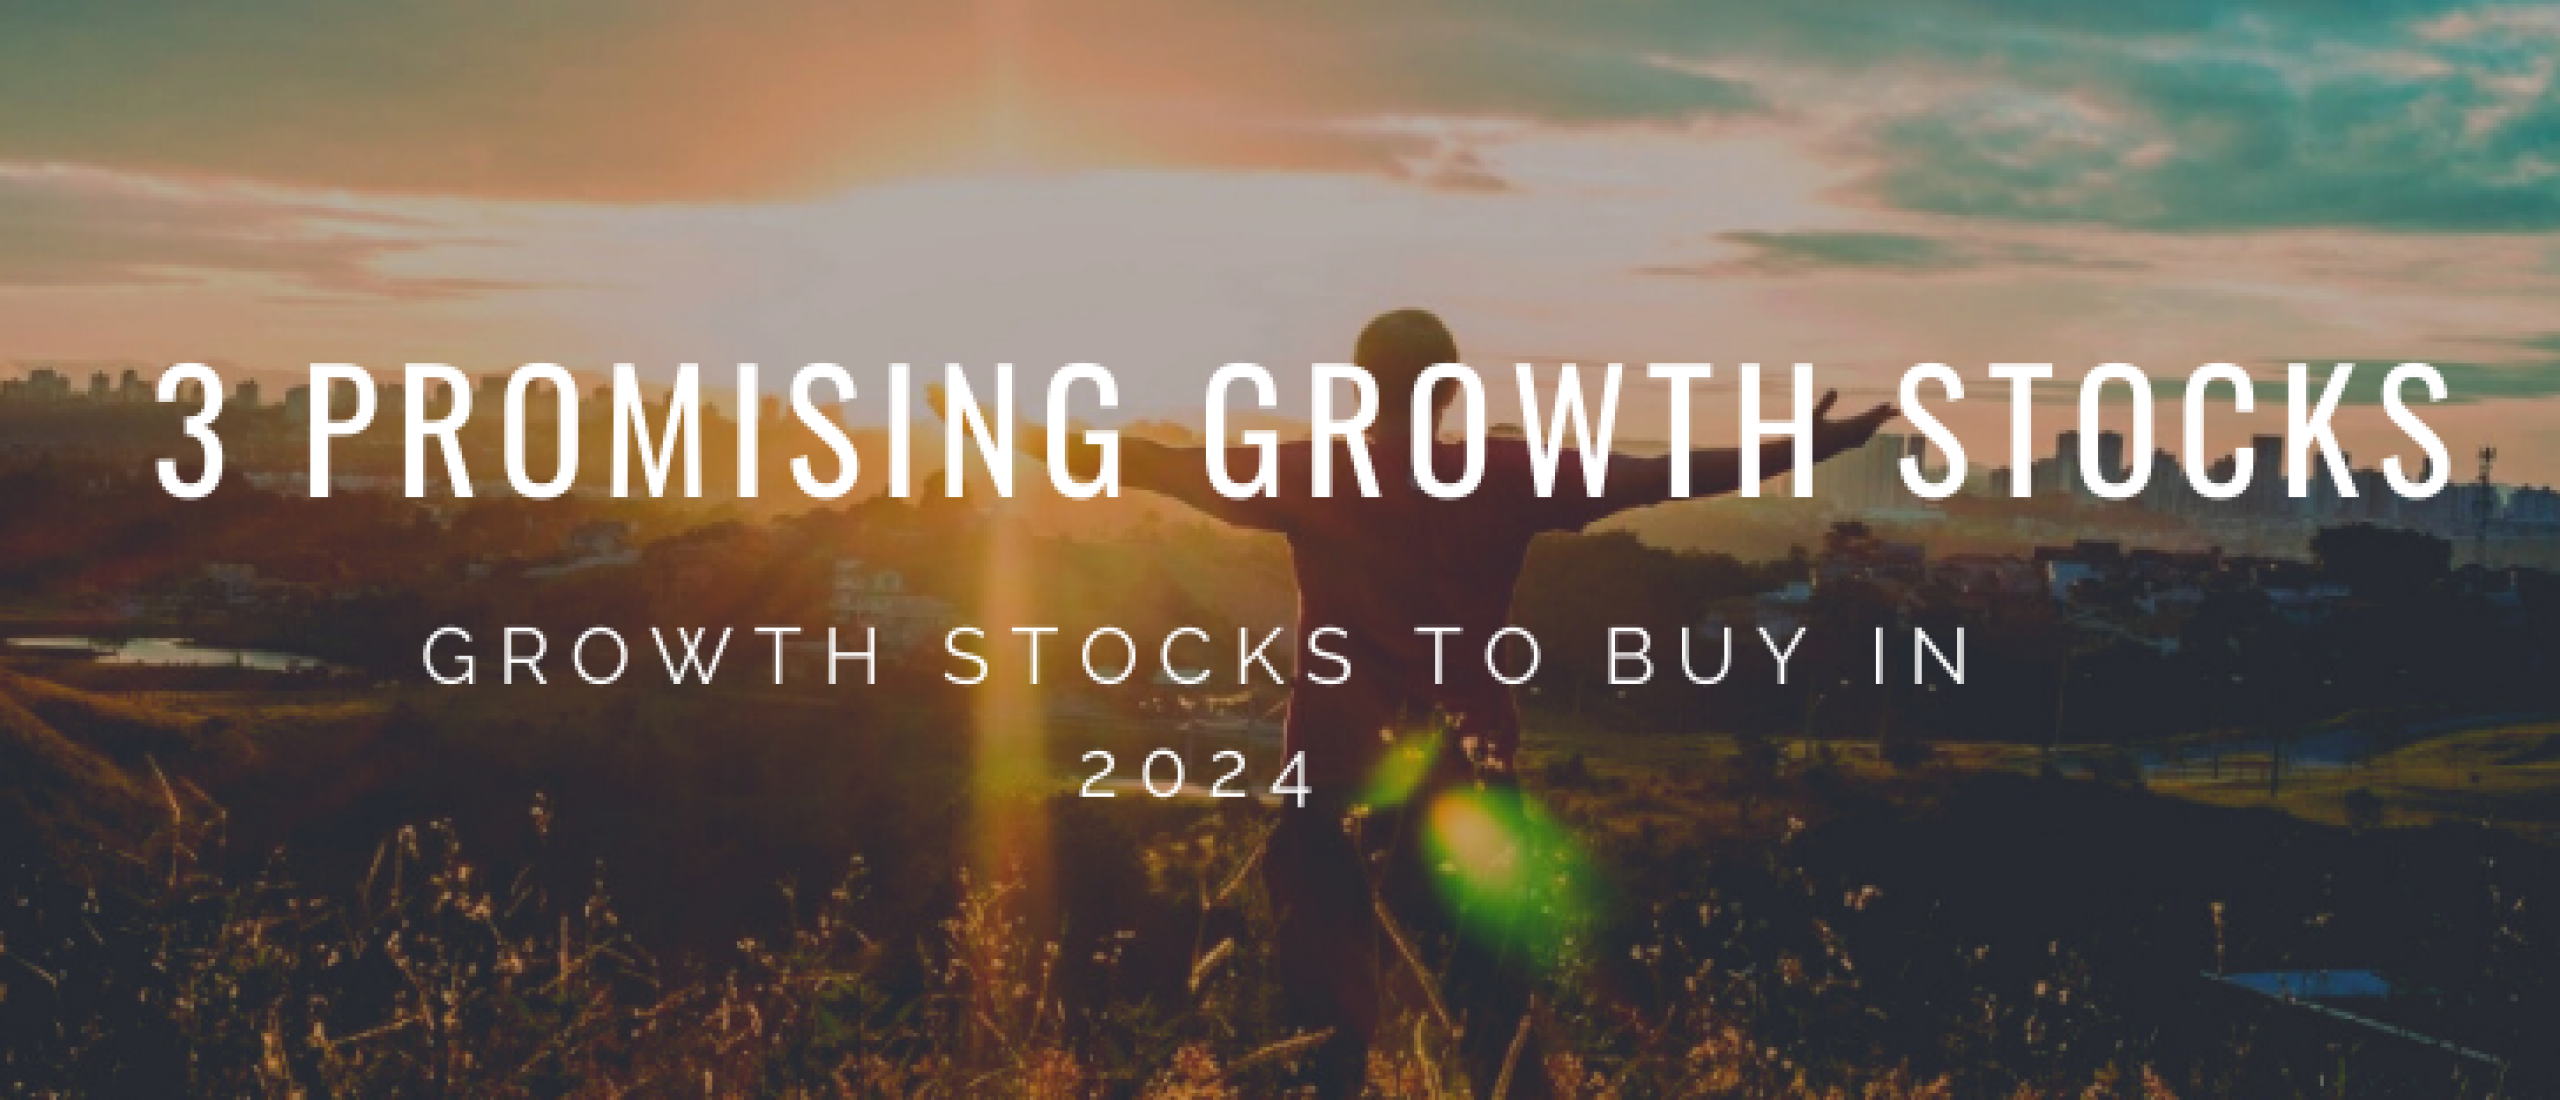 3 Promising Growth Stocks to Buy in February 2024 | Happy Investors